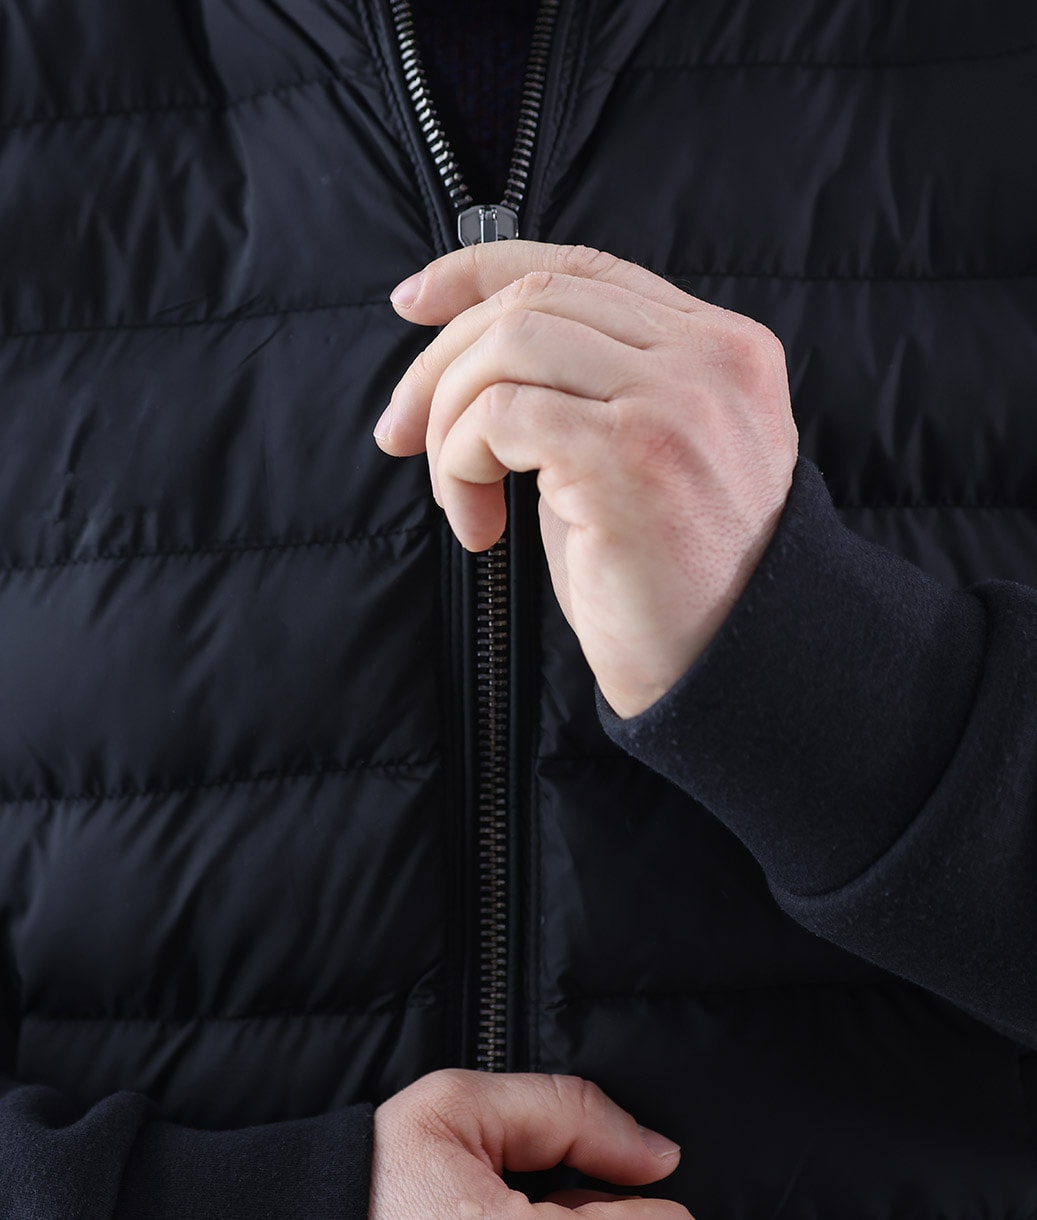 How To Replace the Zipper on Your Favorite Jacket